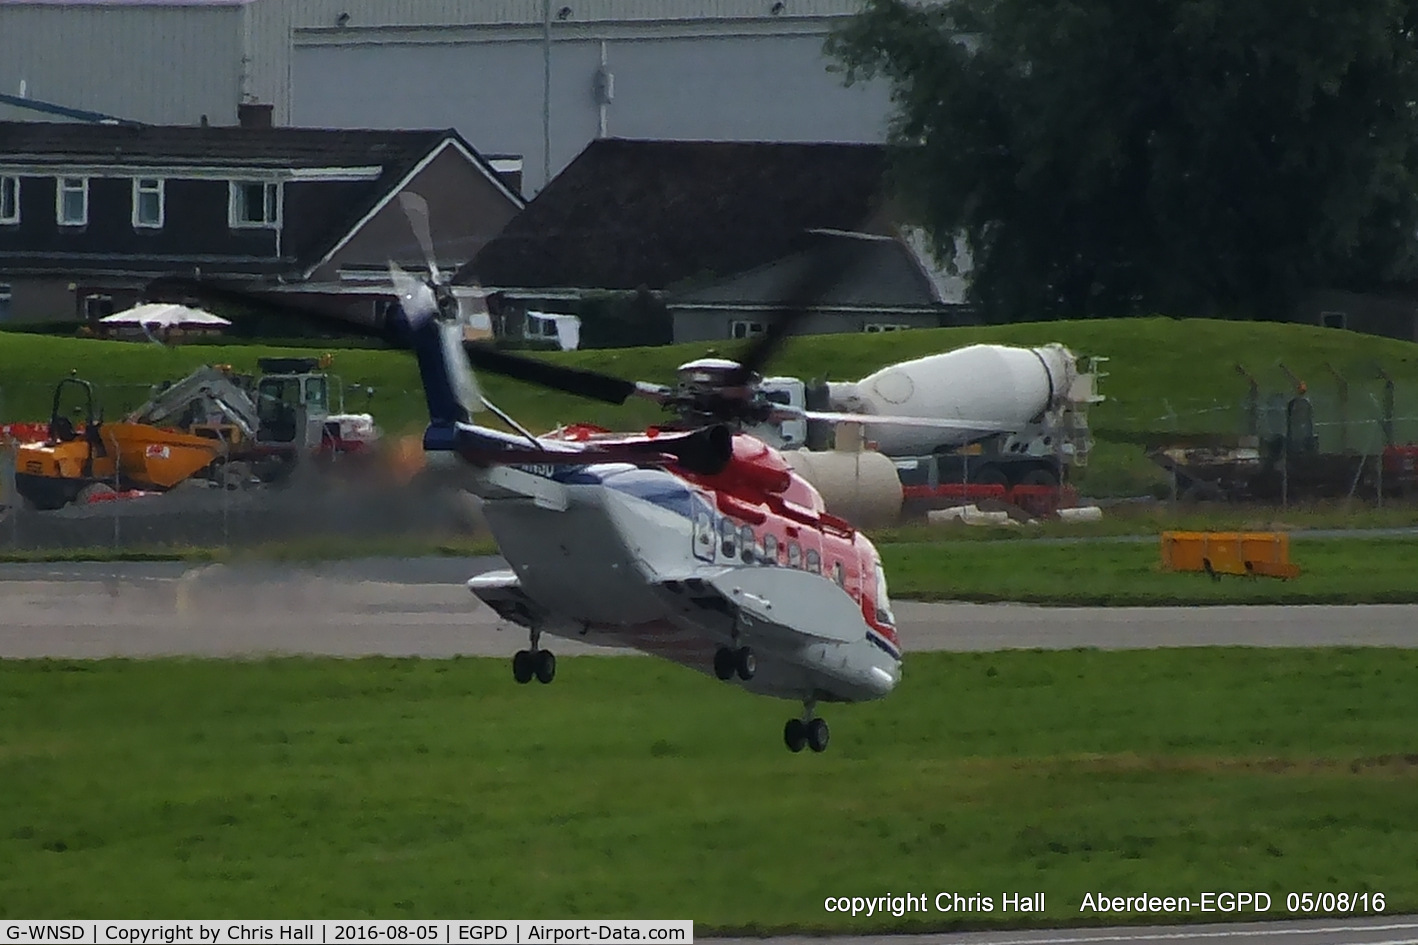 G-WNSD, 2014 Sikorsky S-92A C/N 920231, CHC Scotia